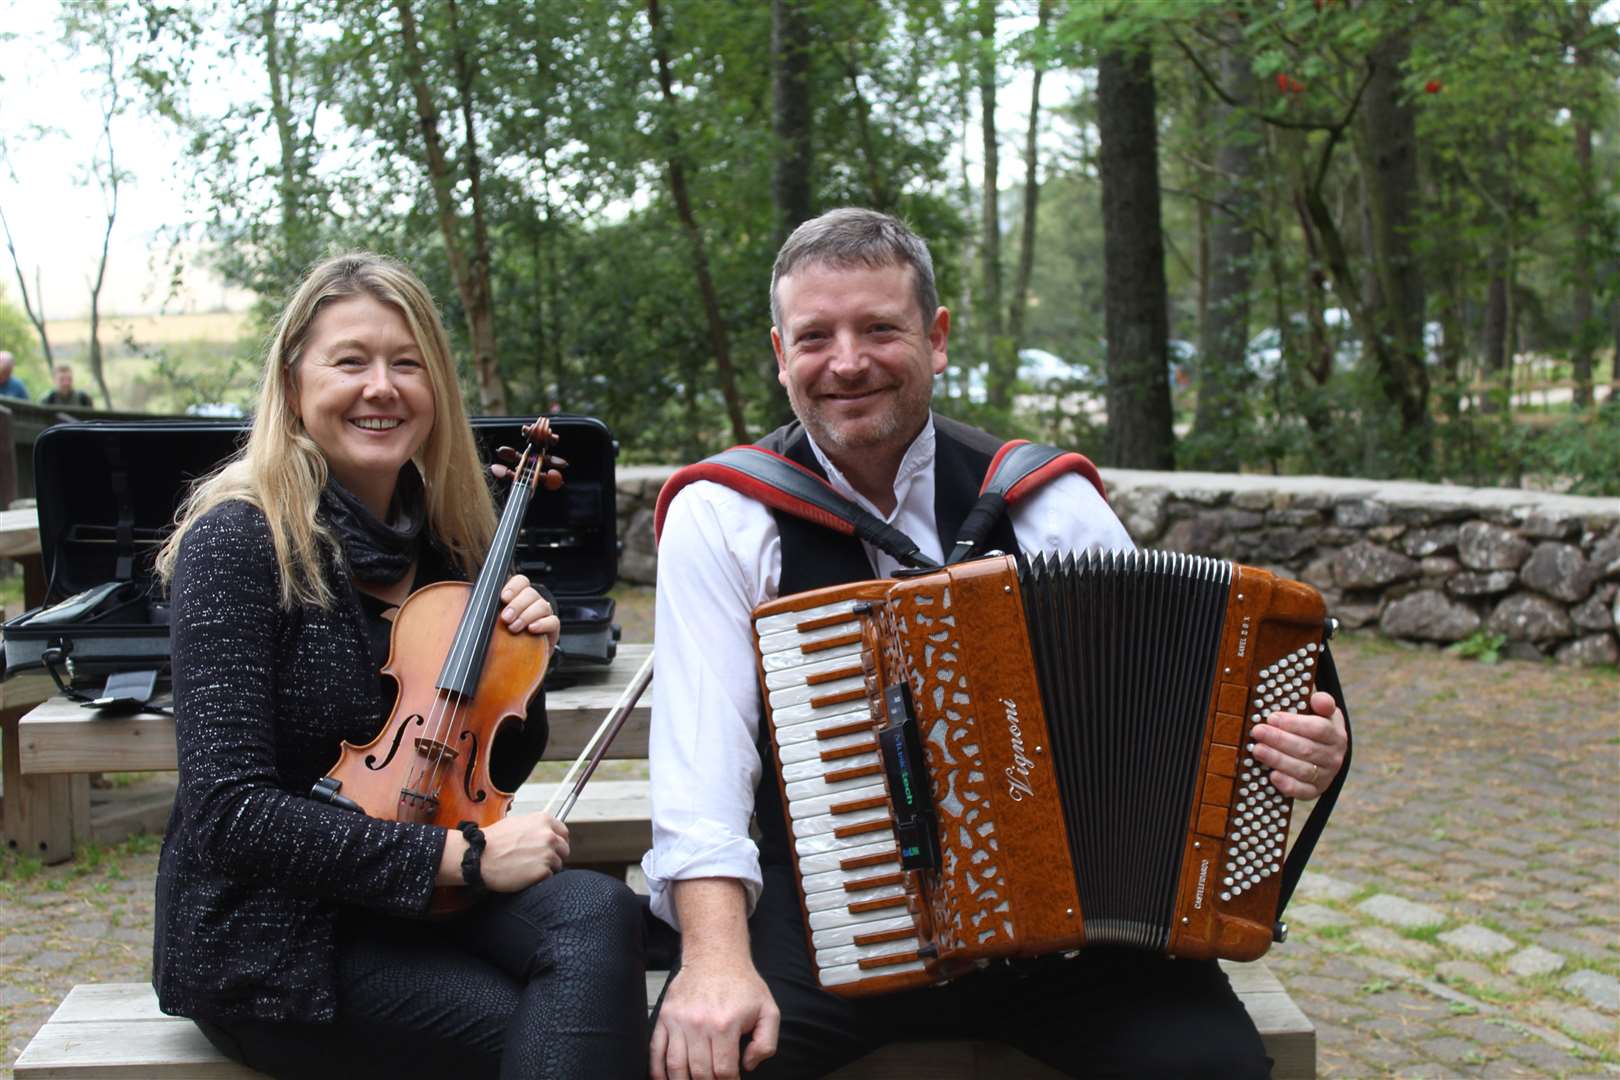 Sarah Beattie-Cook and Charlie Abel held alfresco recitals and songs to visitors along the Colony trail on Bennachie on Saturday. Picture: Griselda McGregor